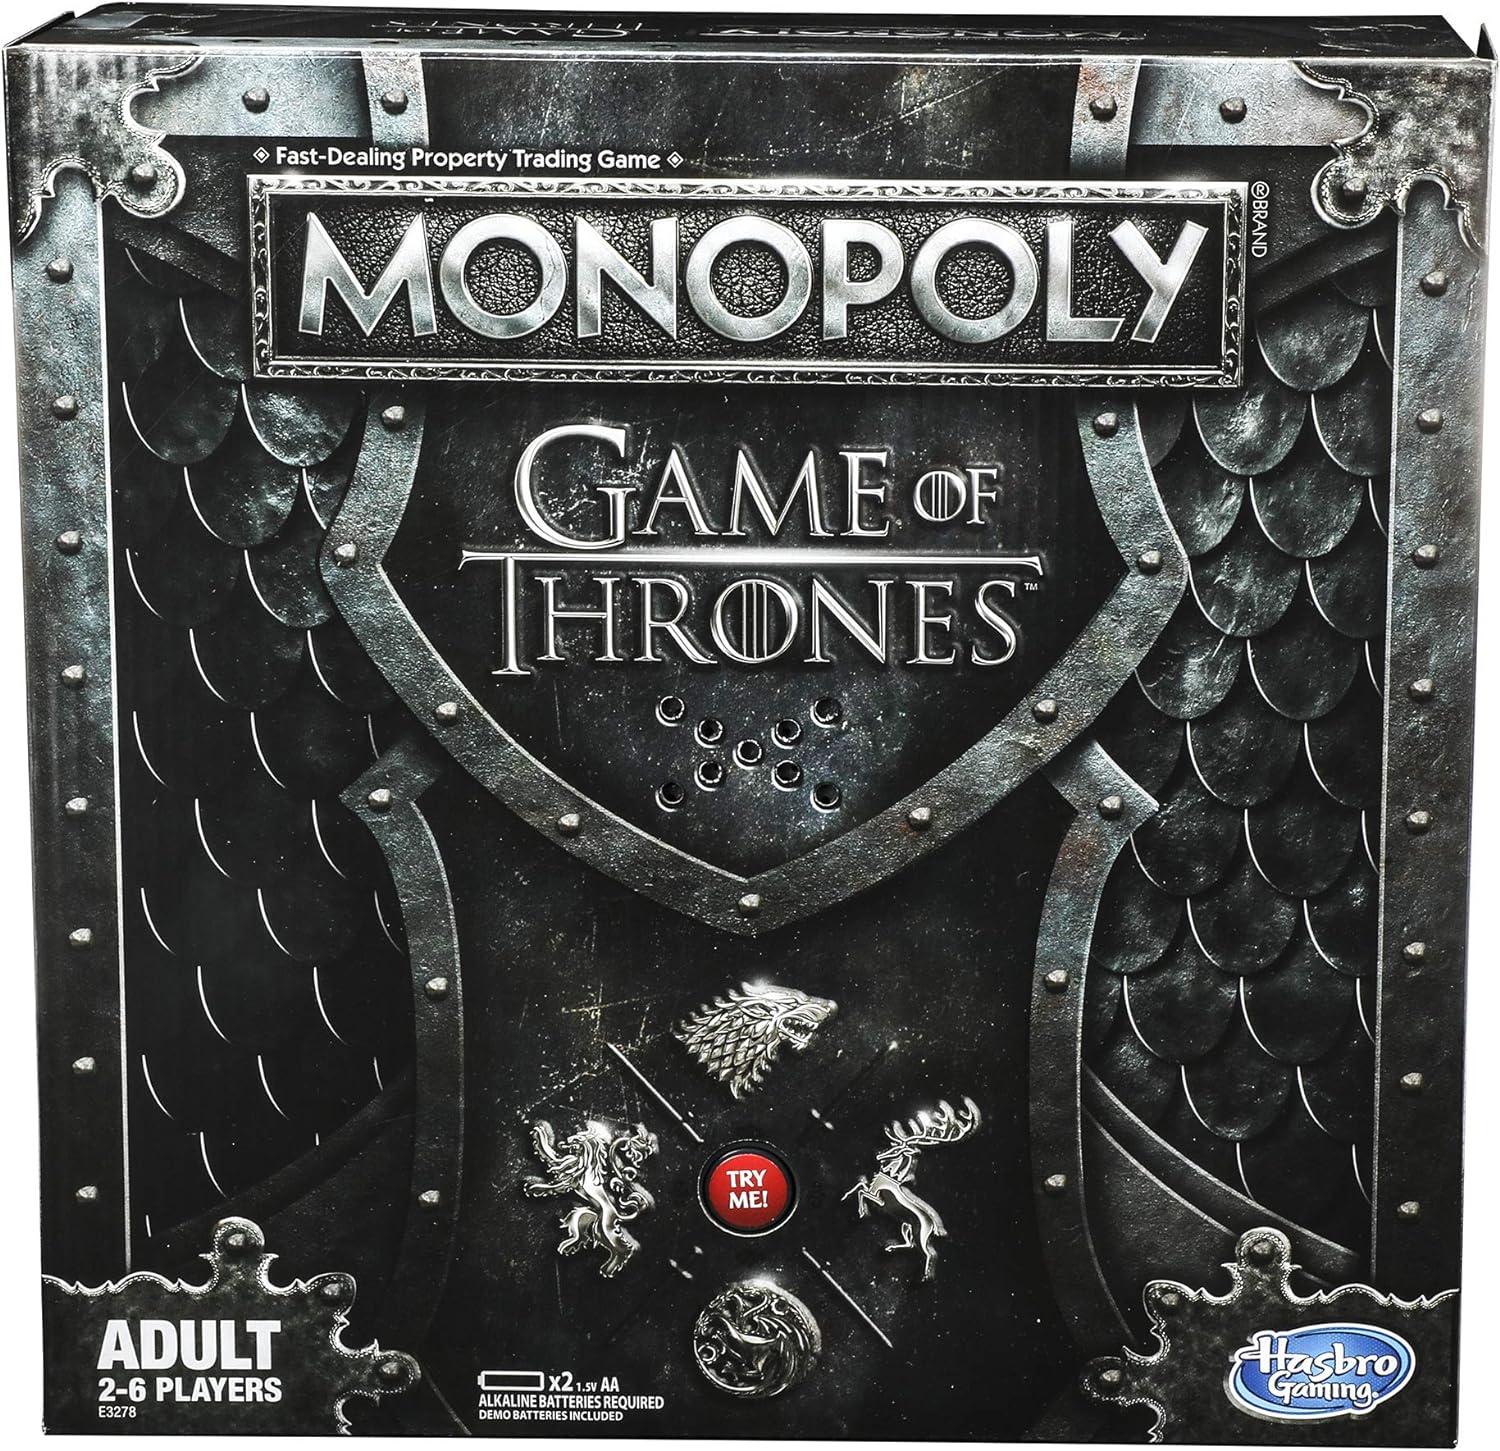 Monopoly Game of Thrones Board Game for $24.49